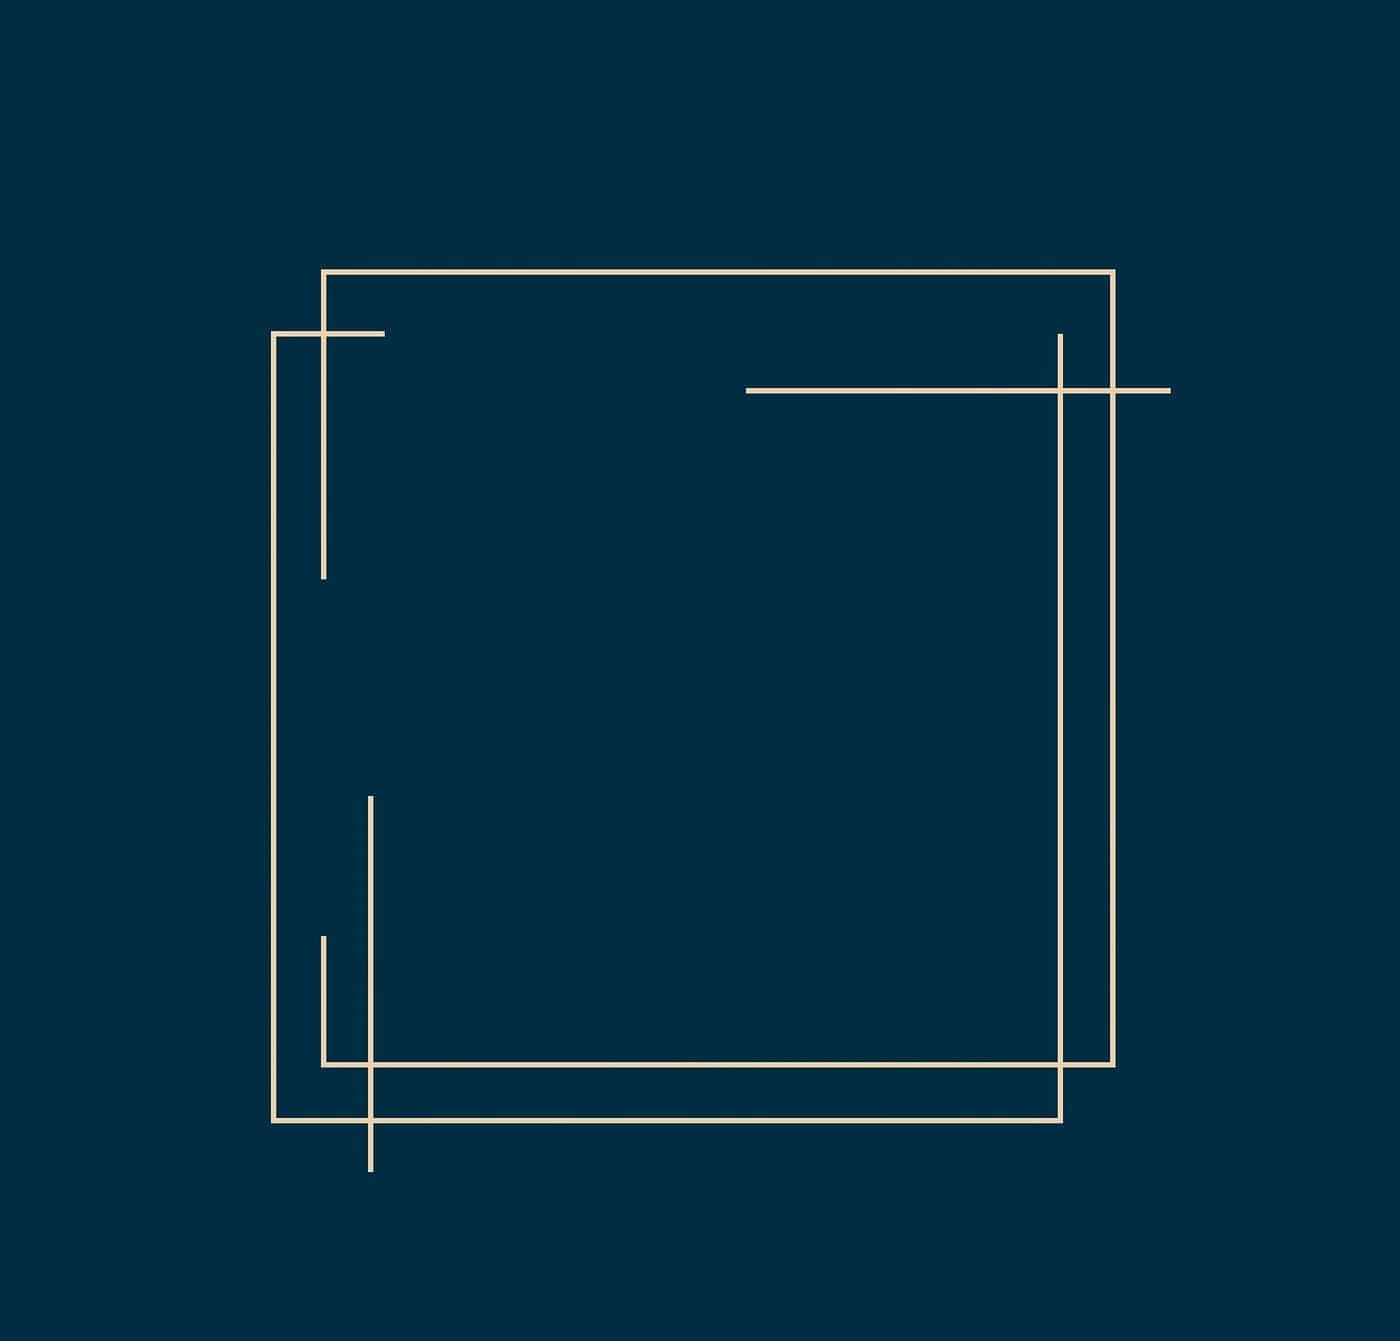 A Square Frame On A Dark Blue Background